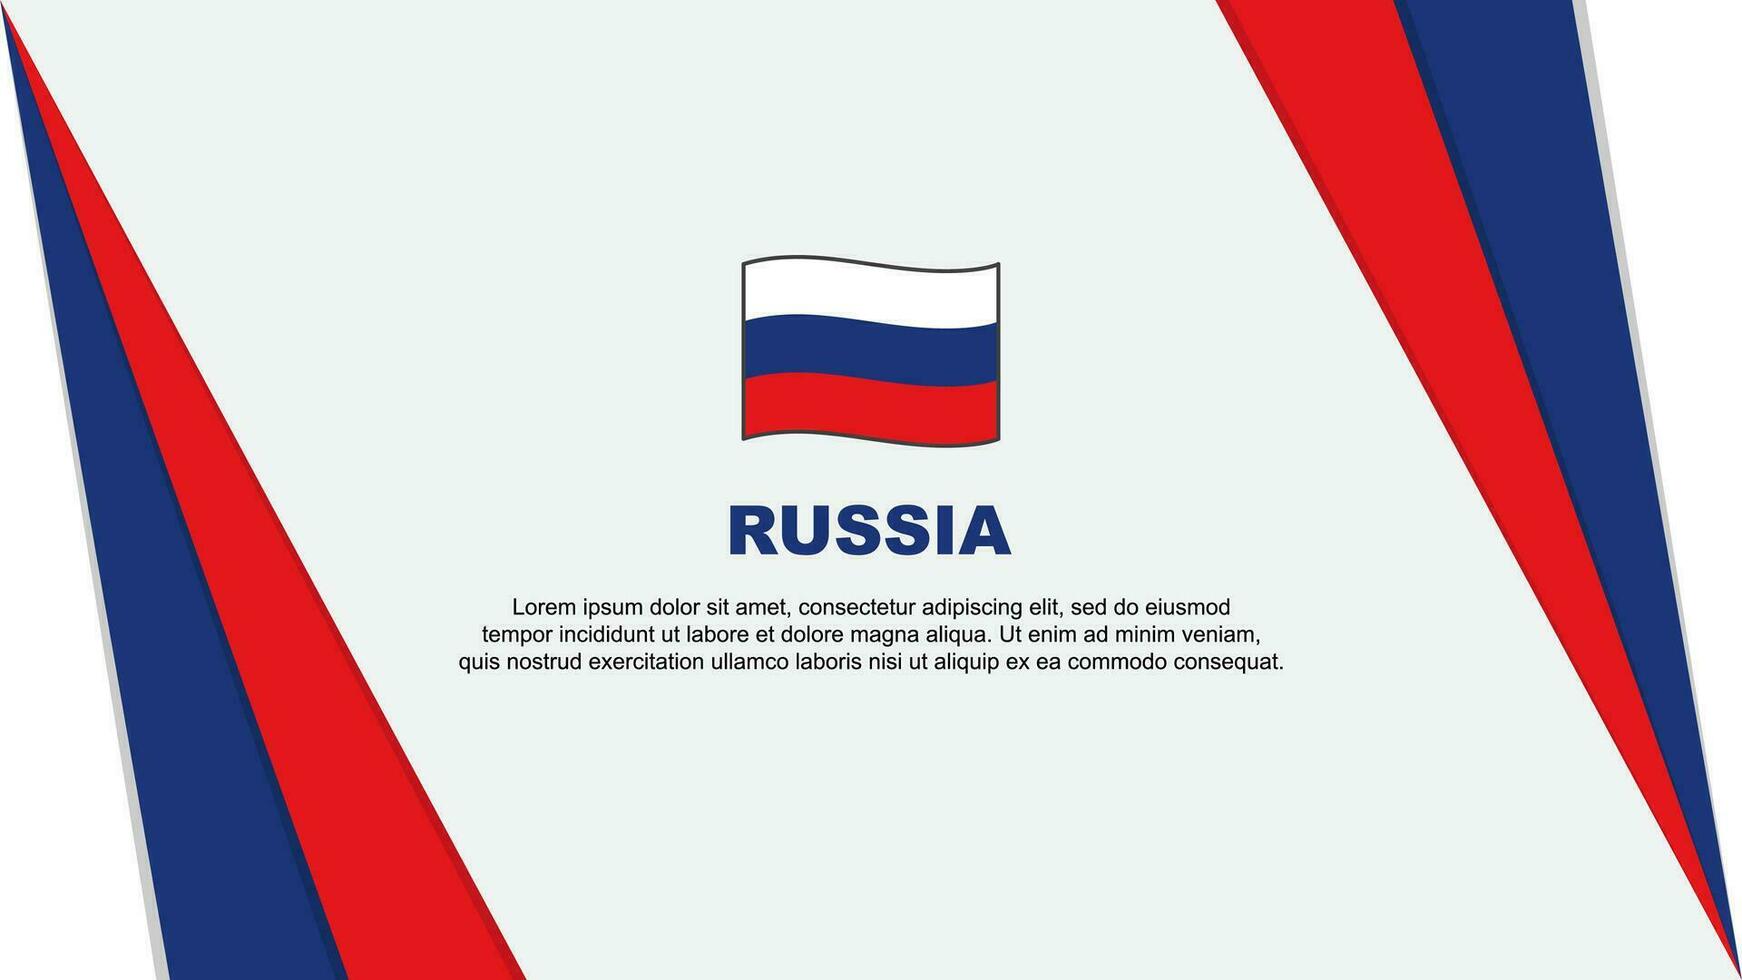 Russia Flag Abstract Background Design Template. Russia Independence Day Banner Cartoon Vector Illustration. Russia Flag